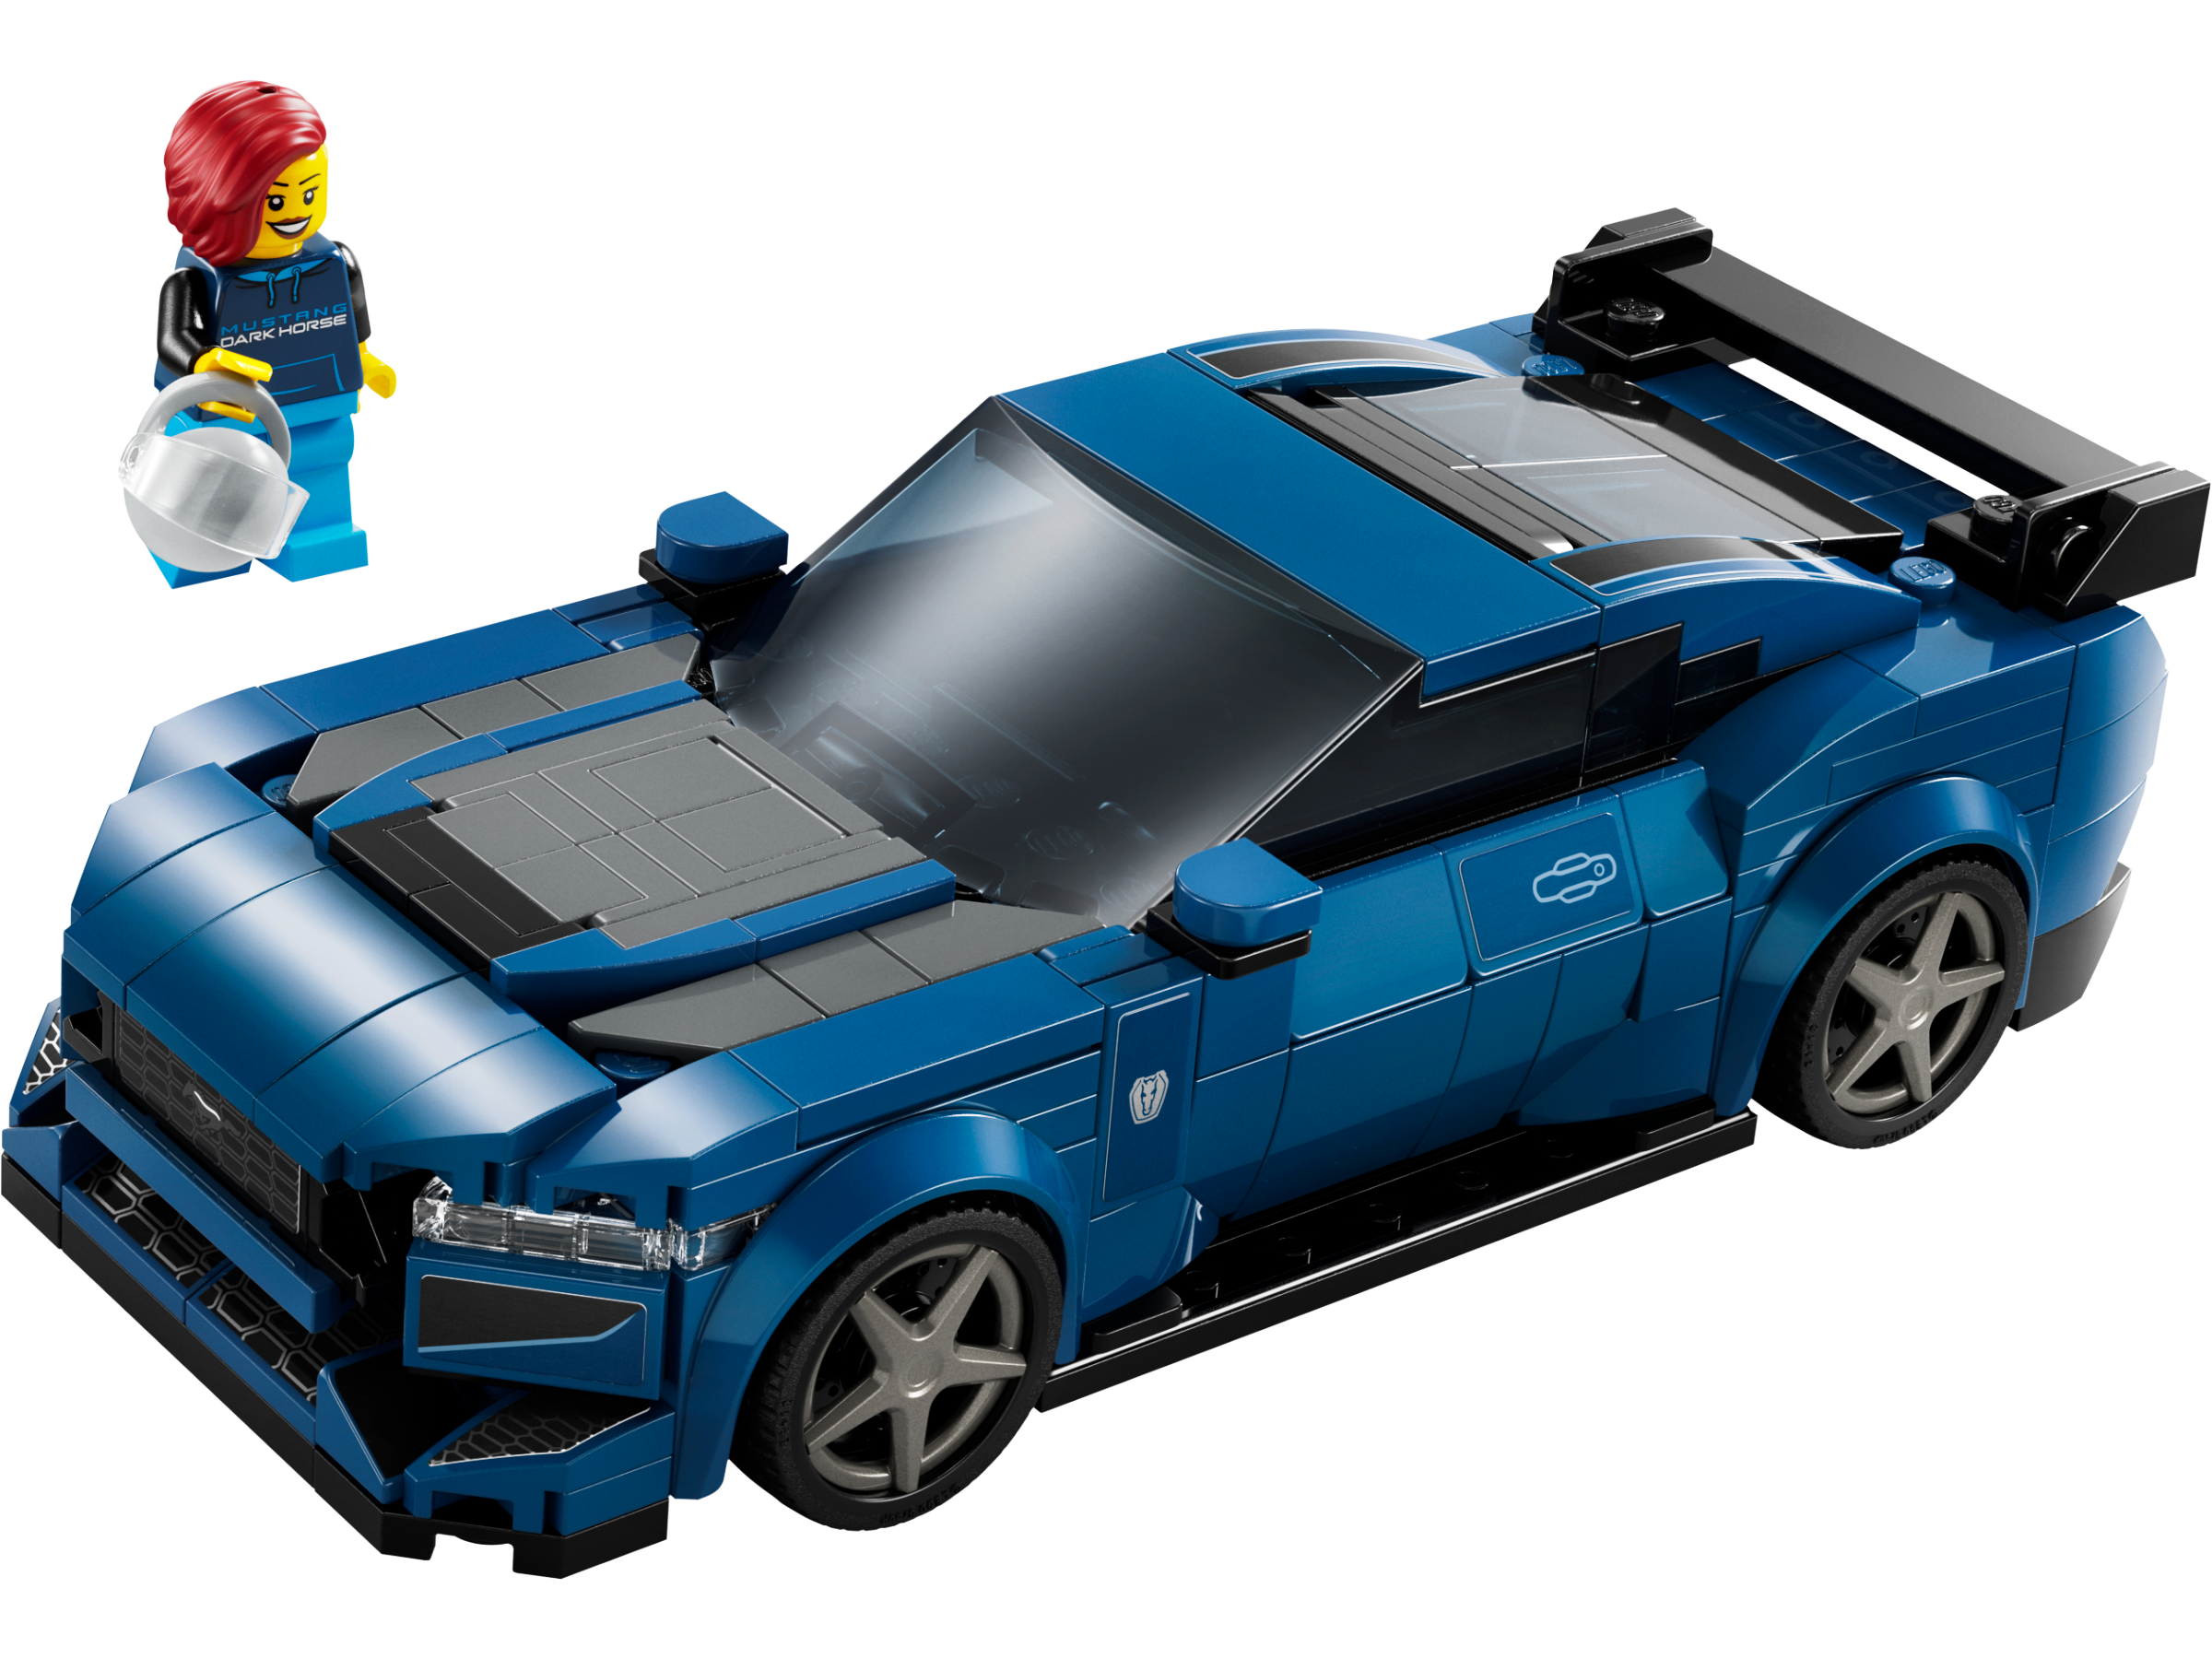 Ford Mustang GT - 2019  Lego cars, Lego truck, Lego racers